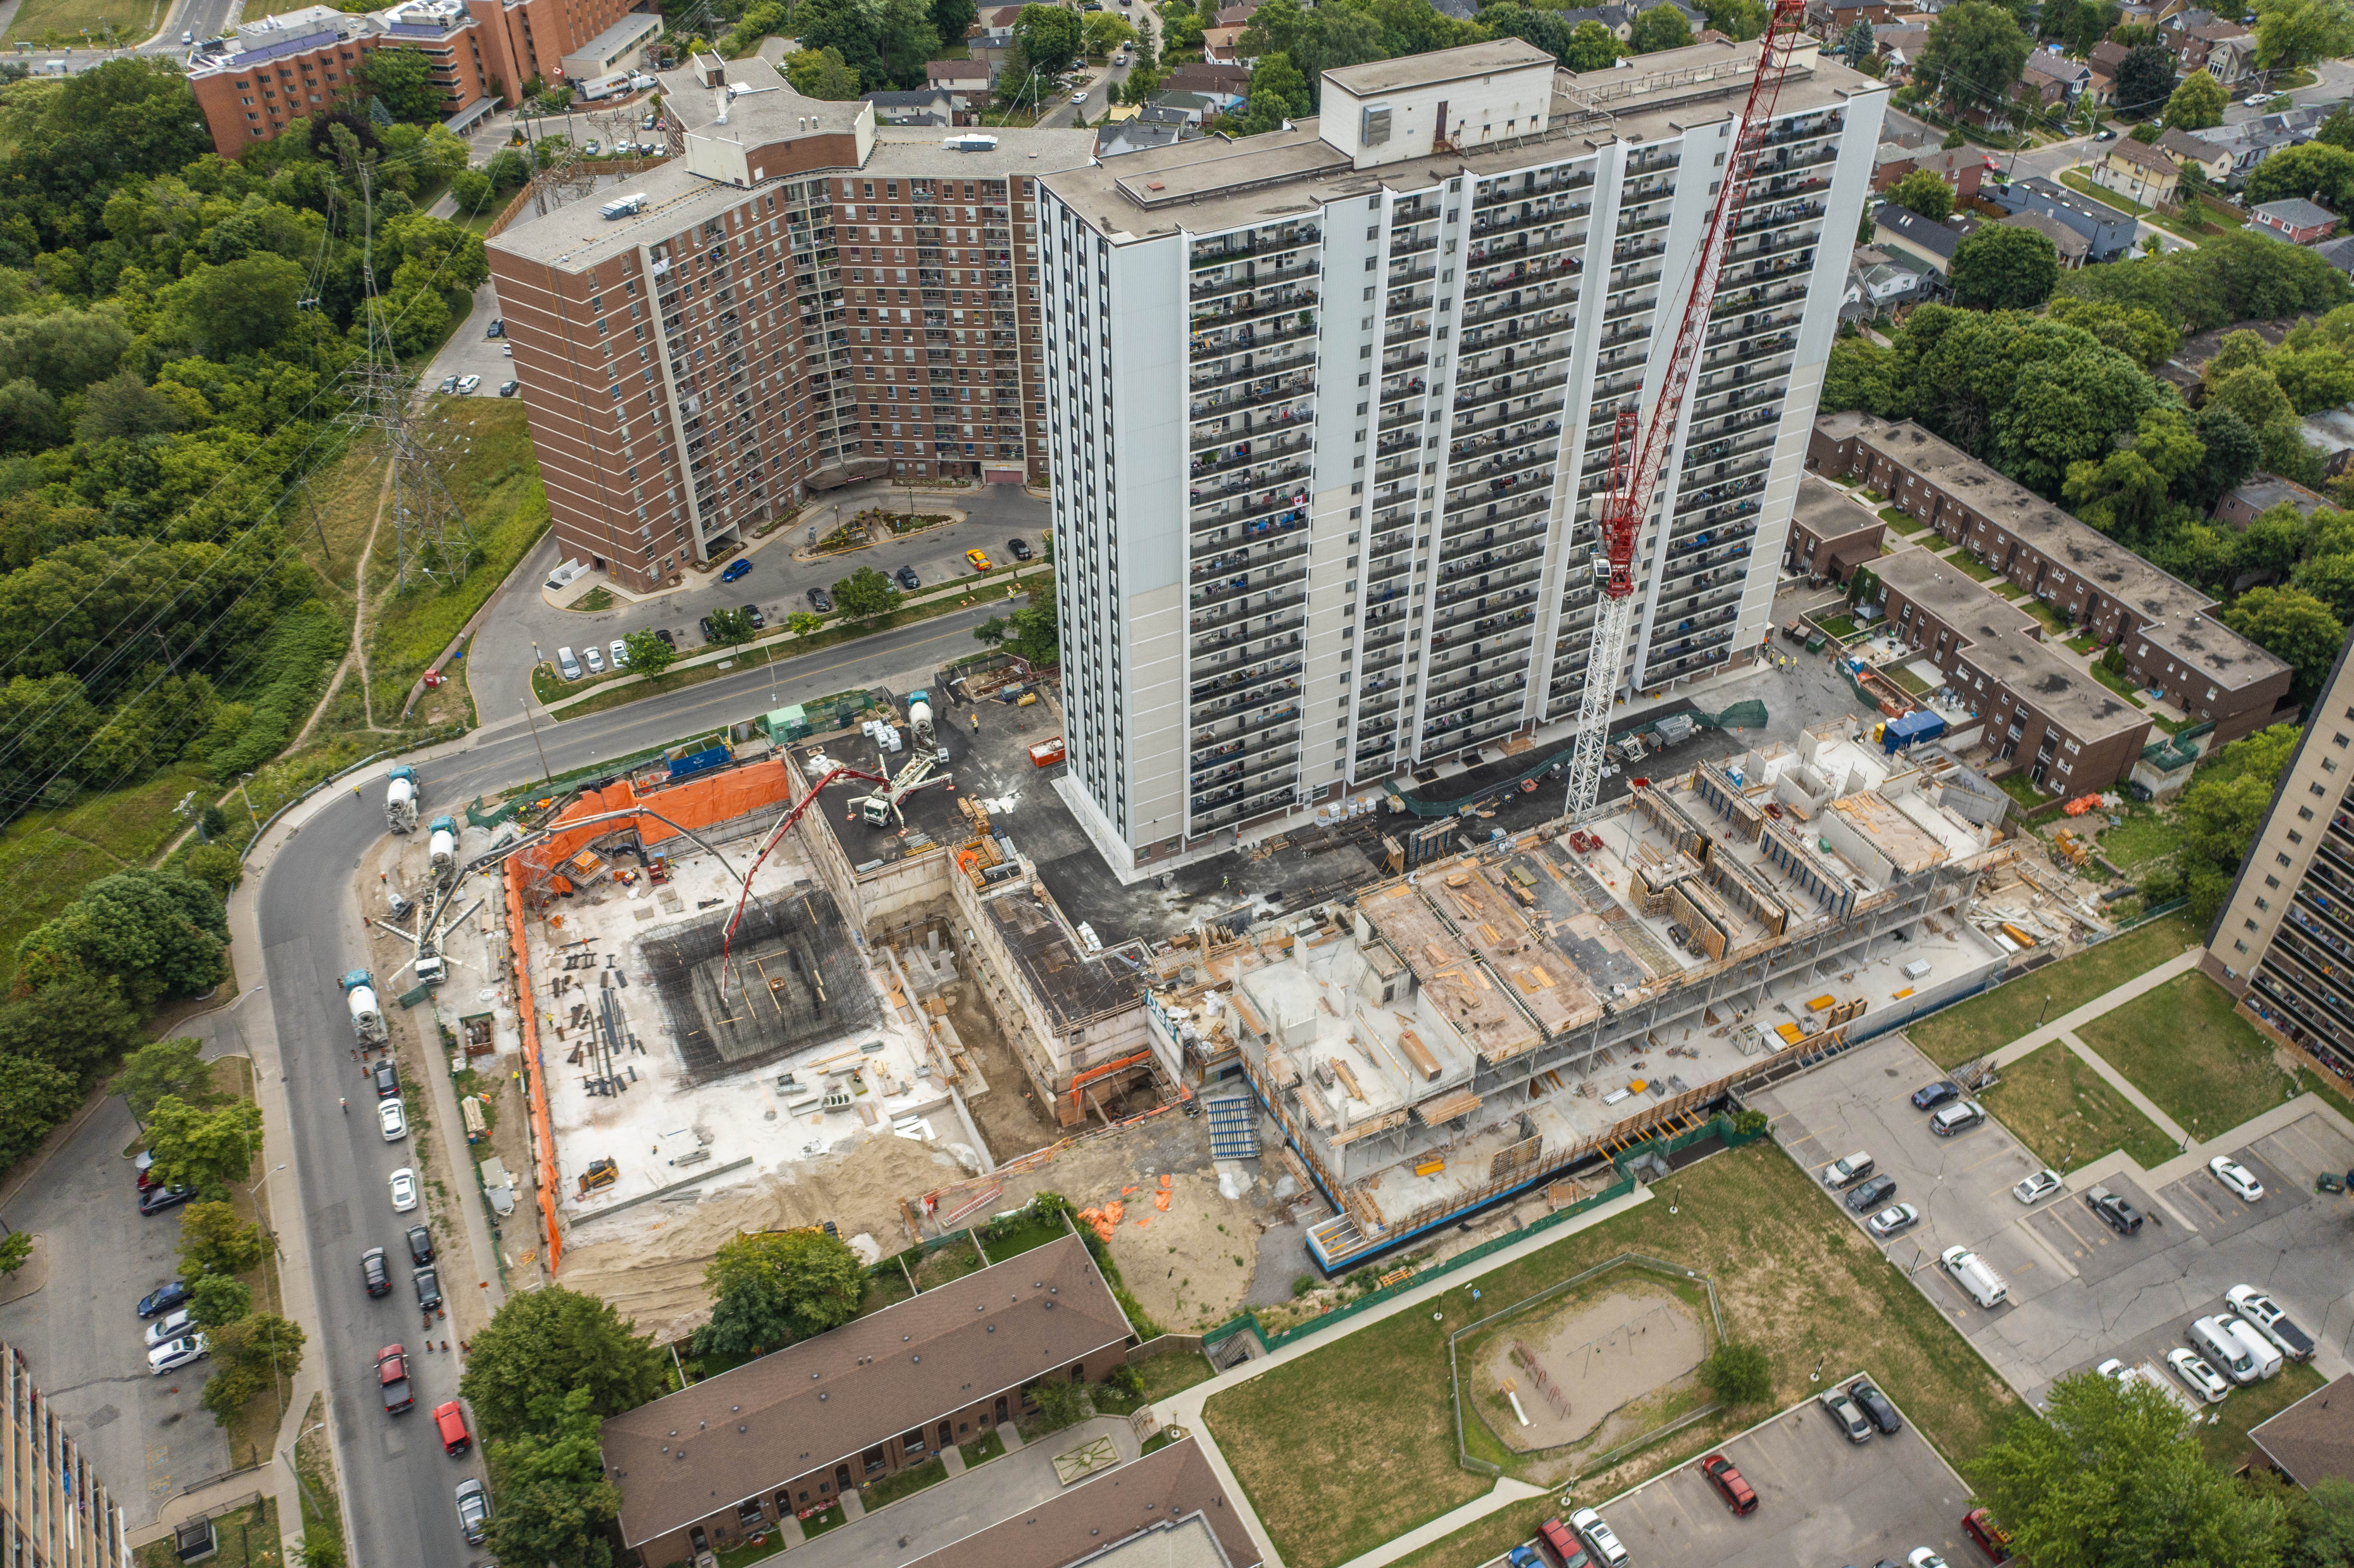 Construction commenced in 2021 at Bela Square, North Danforth Apartments.